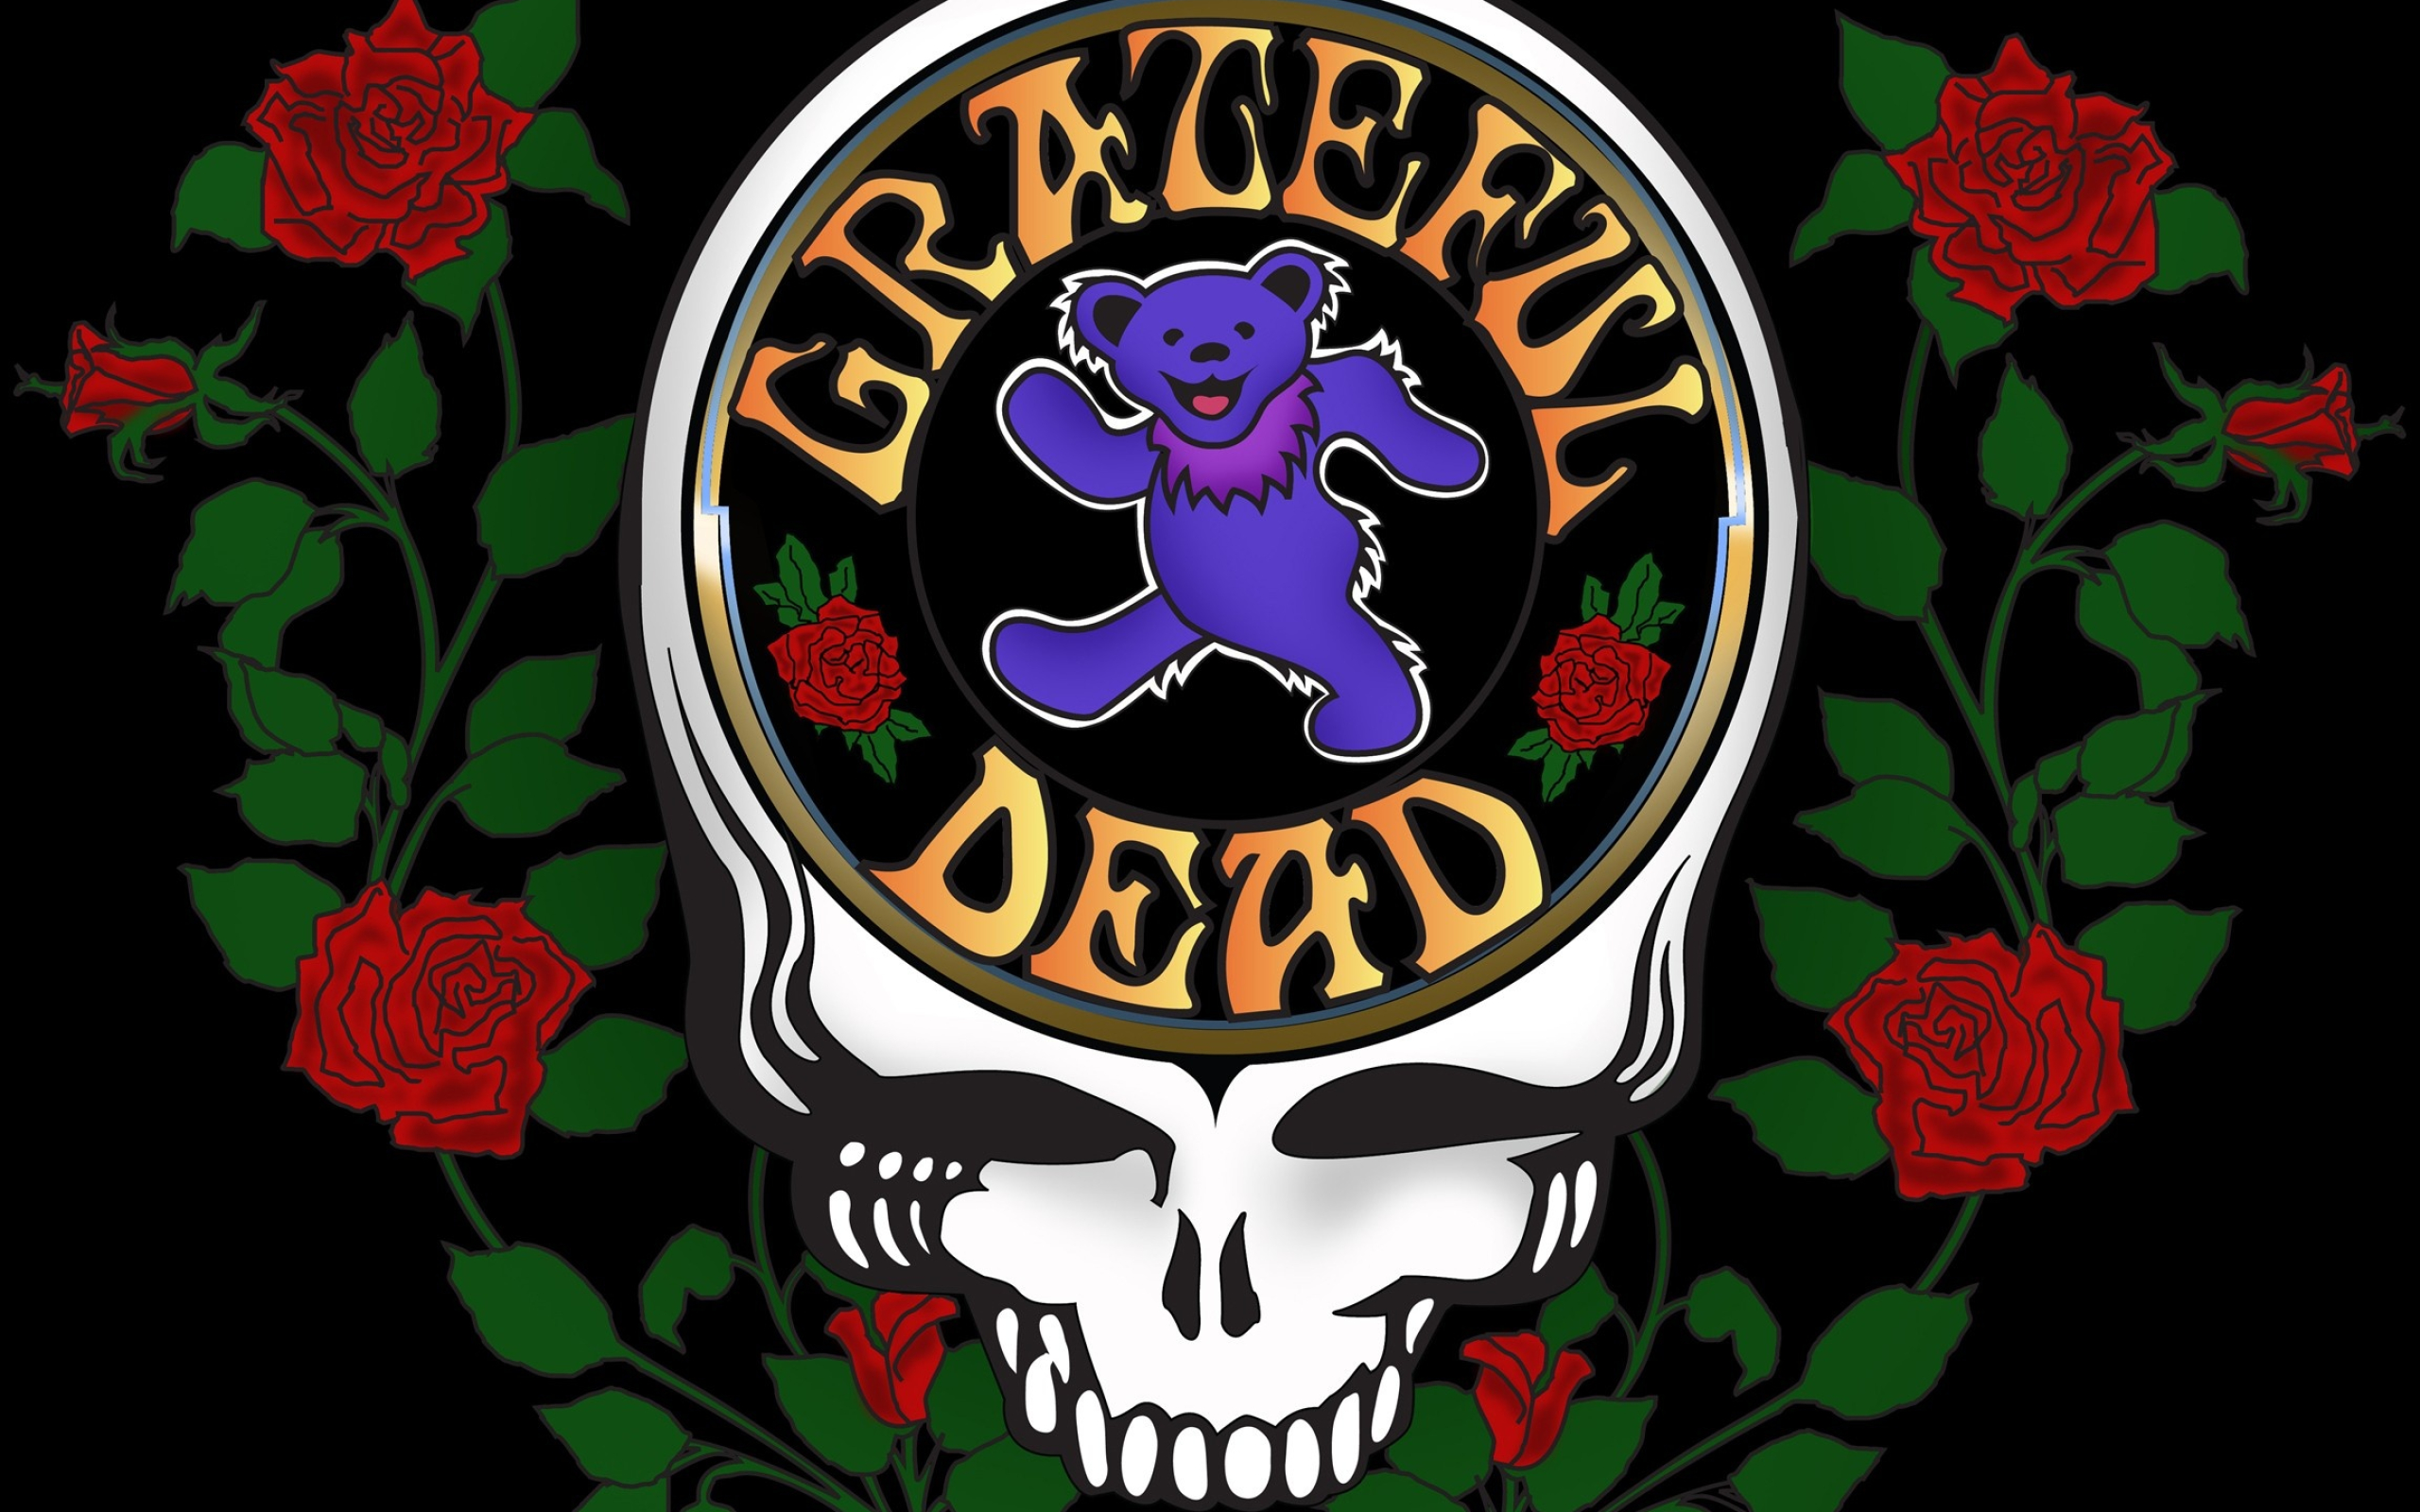 Grateful Dead: The band of the 60s, Ranked 57th by Rolling Stone Magazine, Instrumental jams. 2560x1600 HD Background.